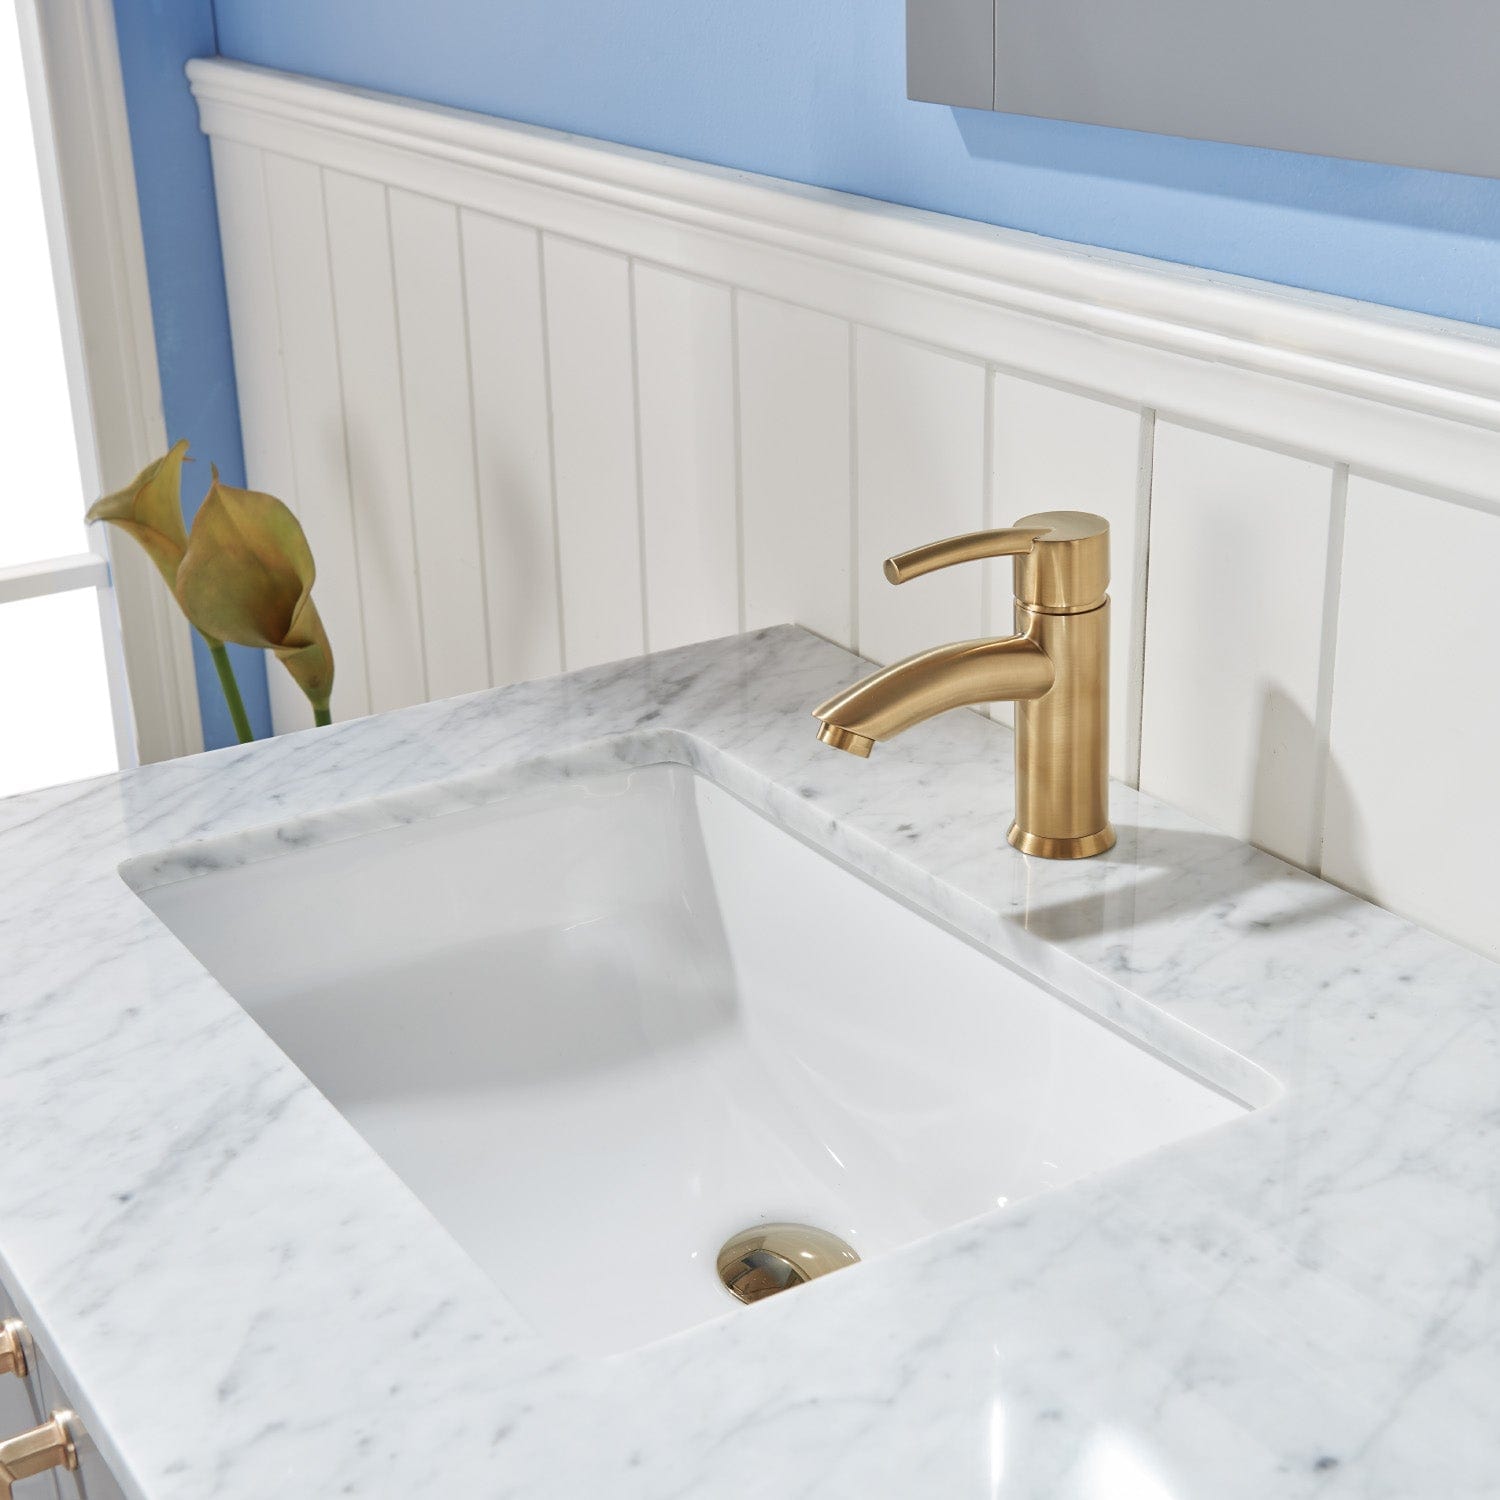 Altair Sutton 36" Single Bathroom Vanity Set in Gray and Carrara White Marble Countertop without Mirror 541036-GR-CA-NM - Molaix631112971829Vanity541036-GR-CA-NM